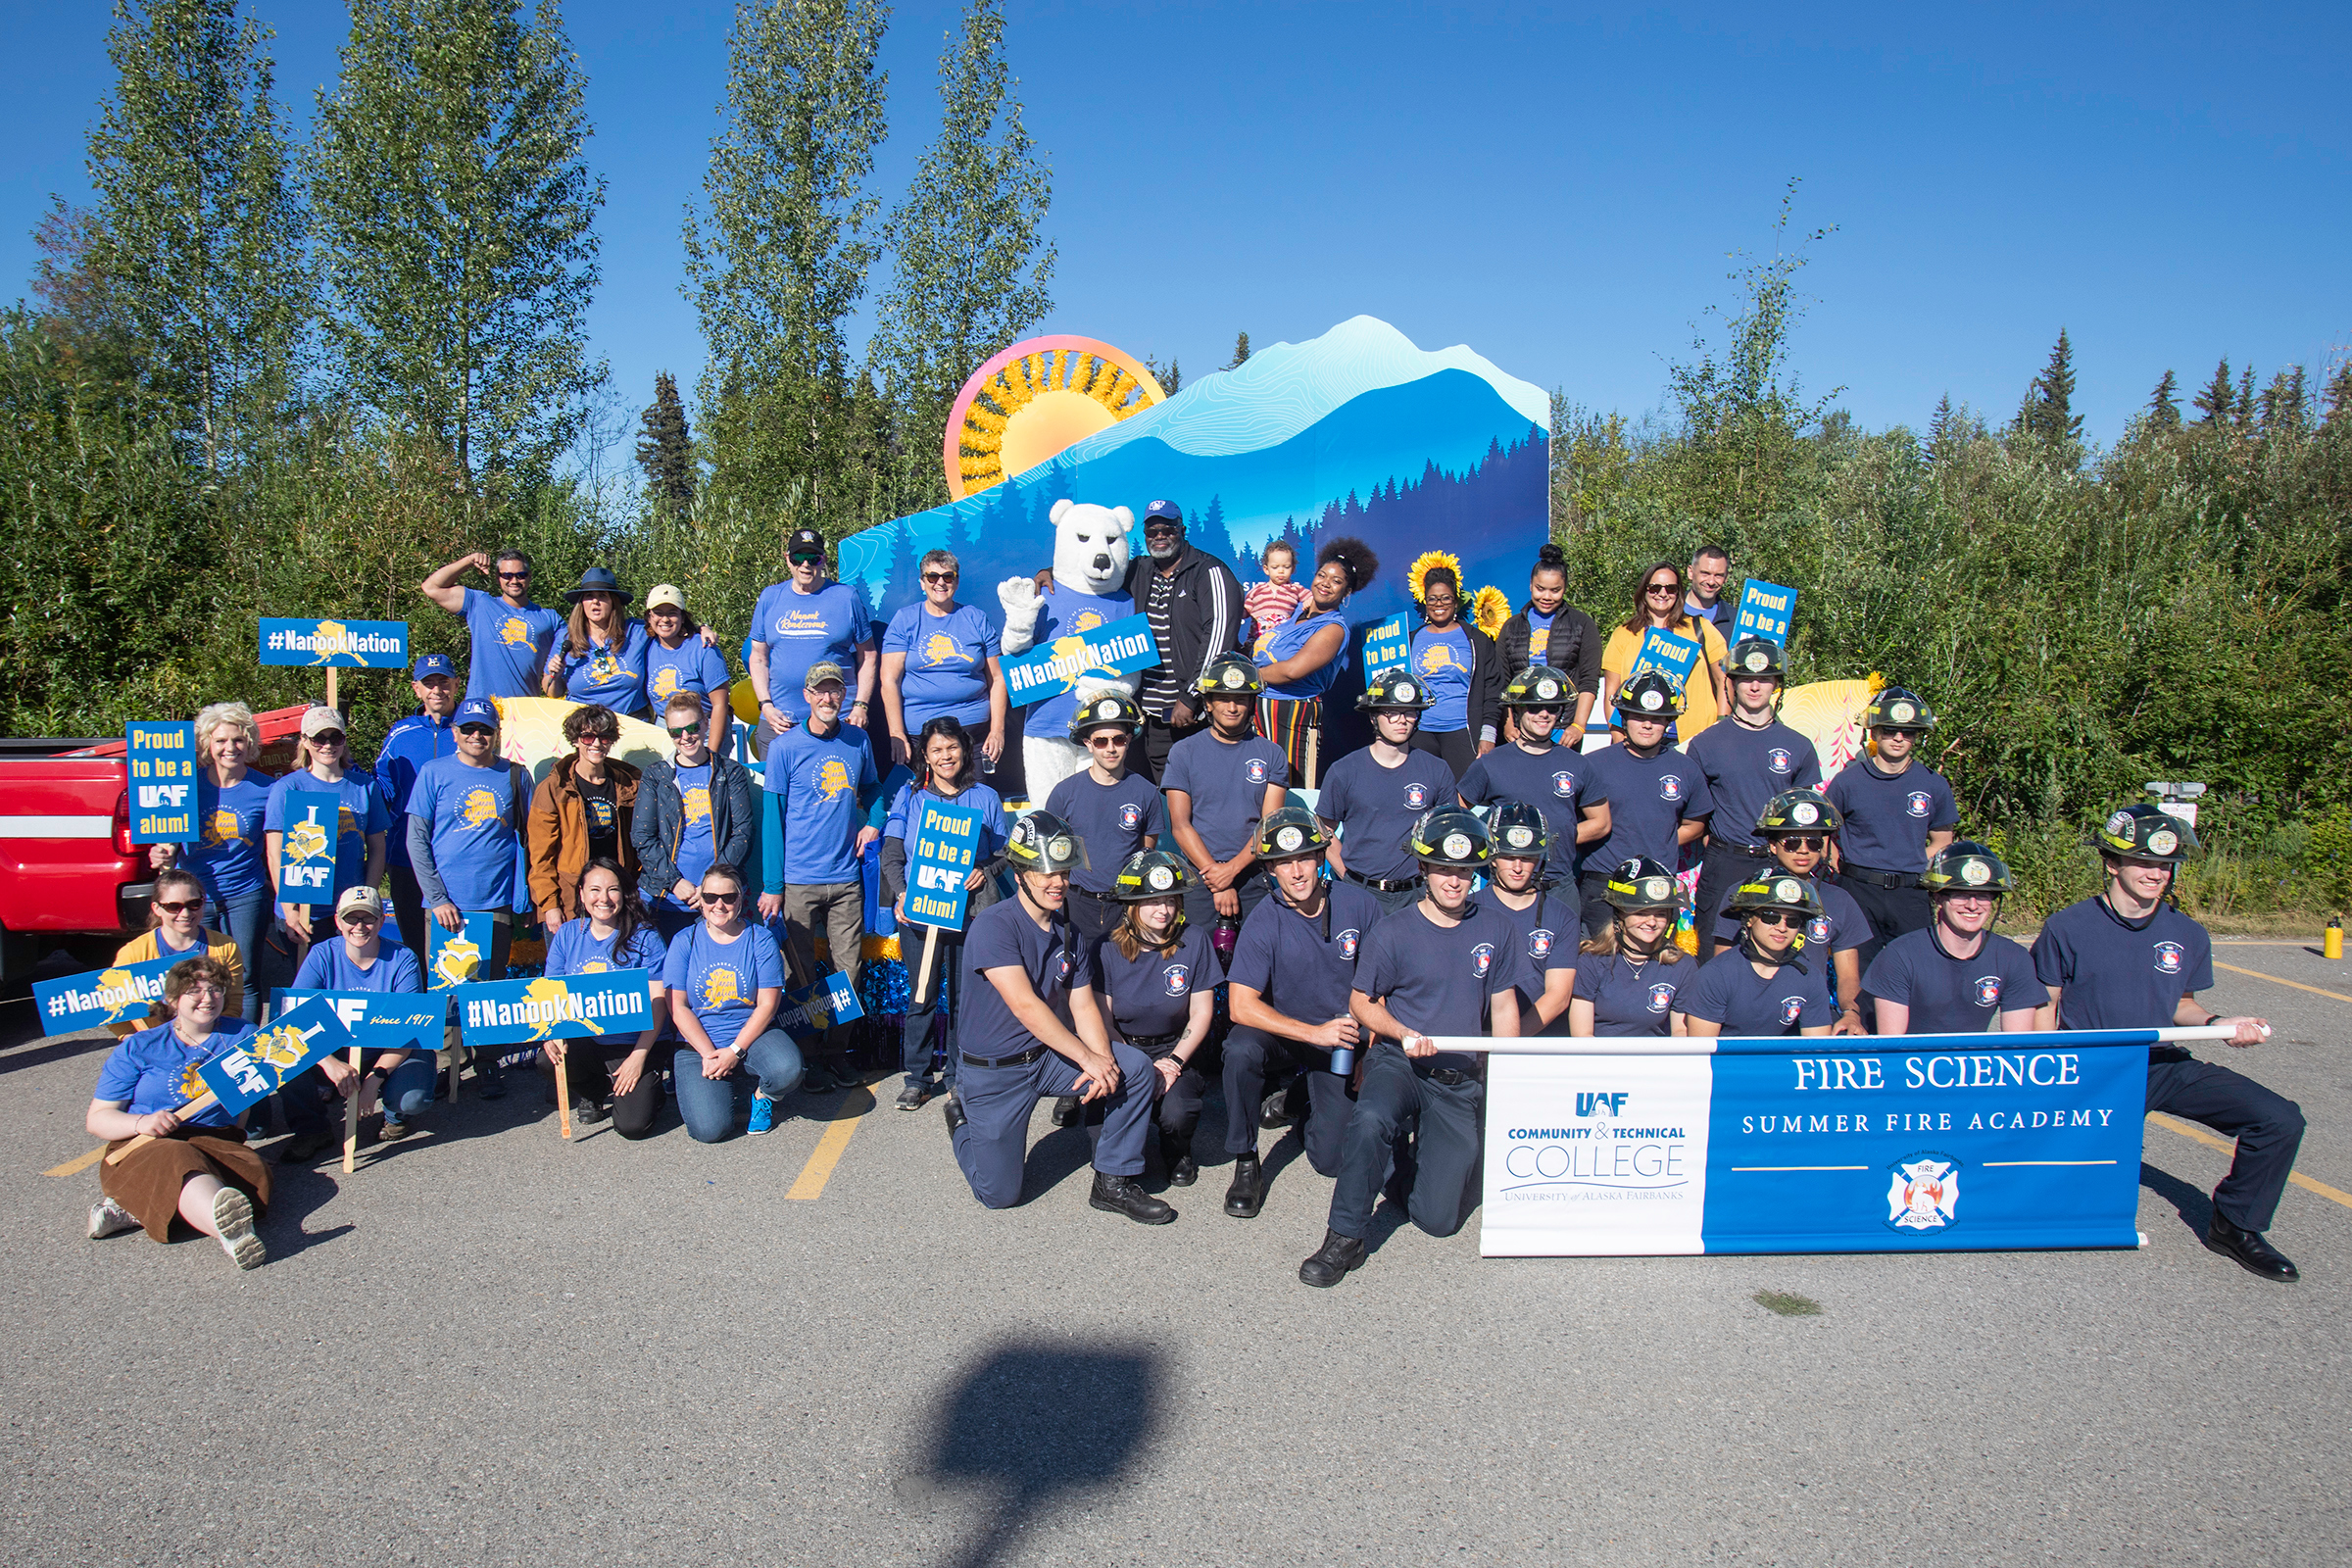 UAF faculty, staff, students and alumni participate in the Golden Days Parade on Saturday, July 23, 2022.